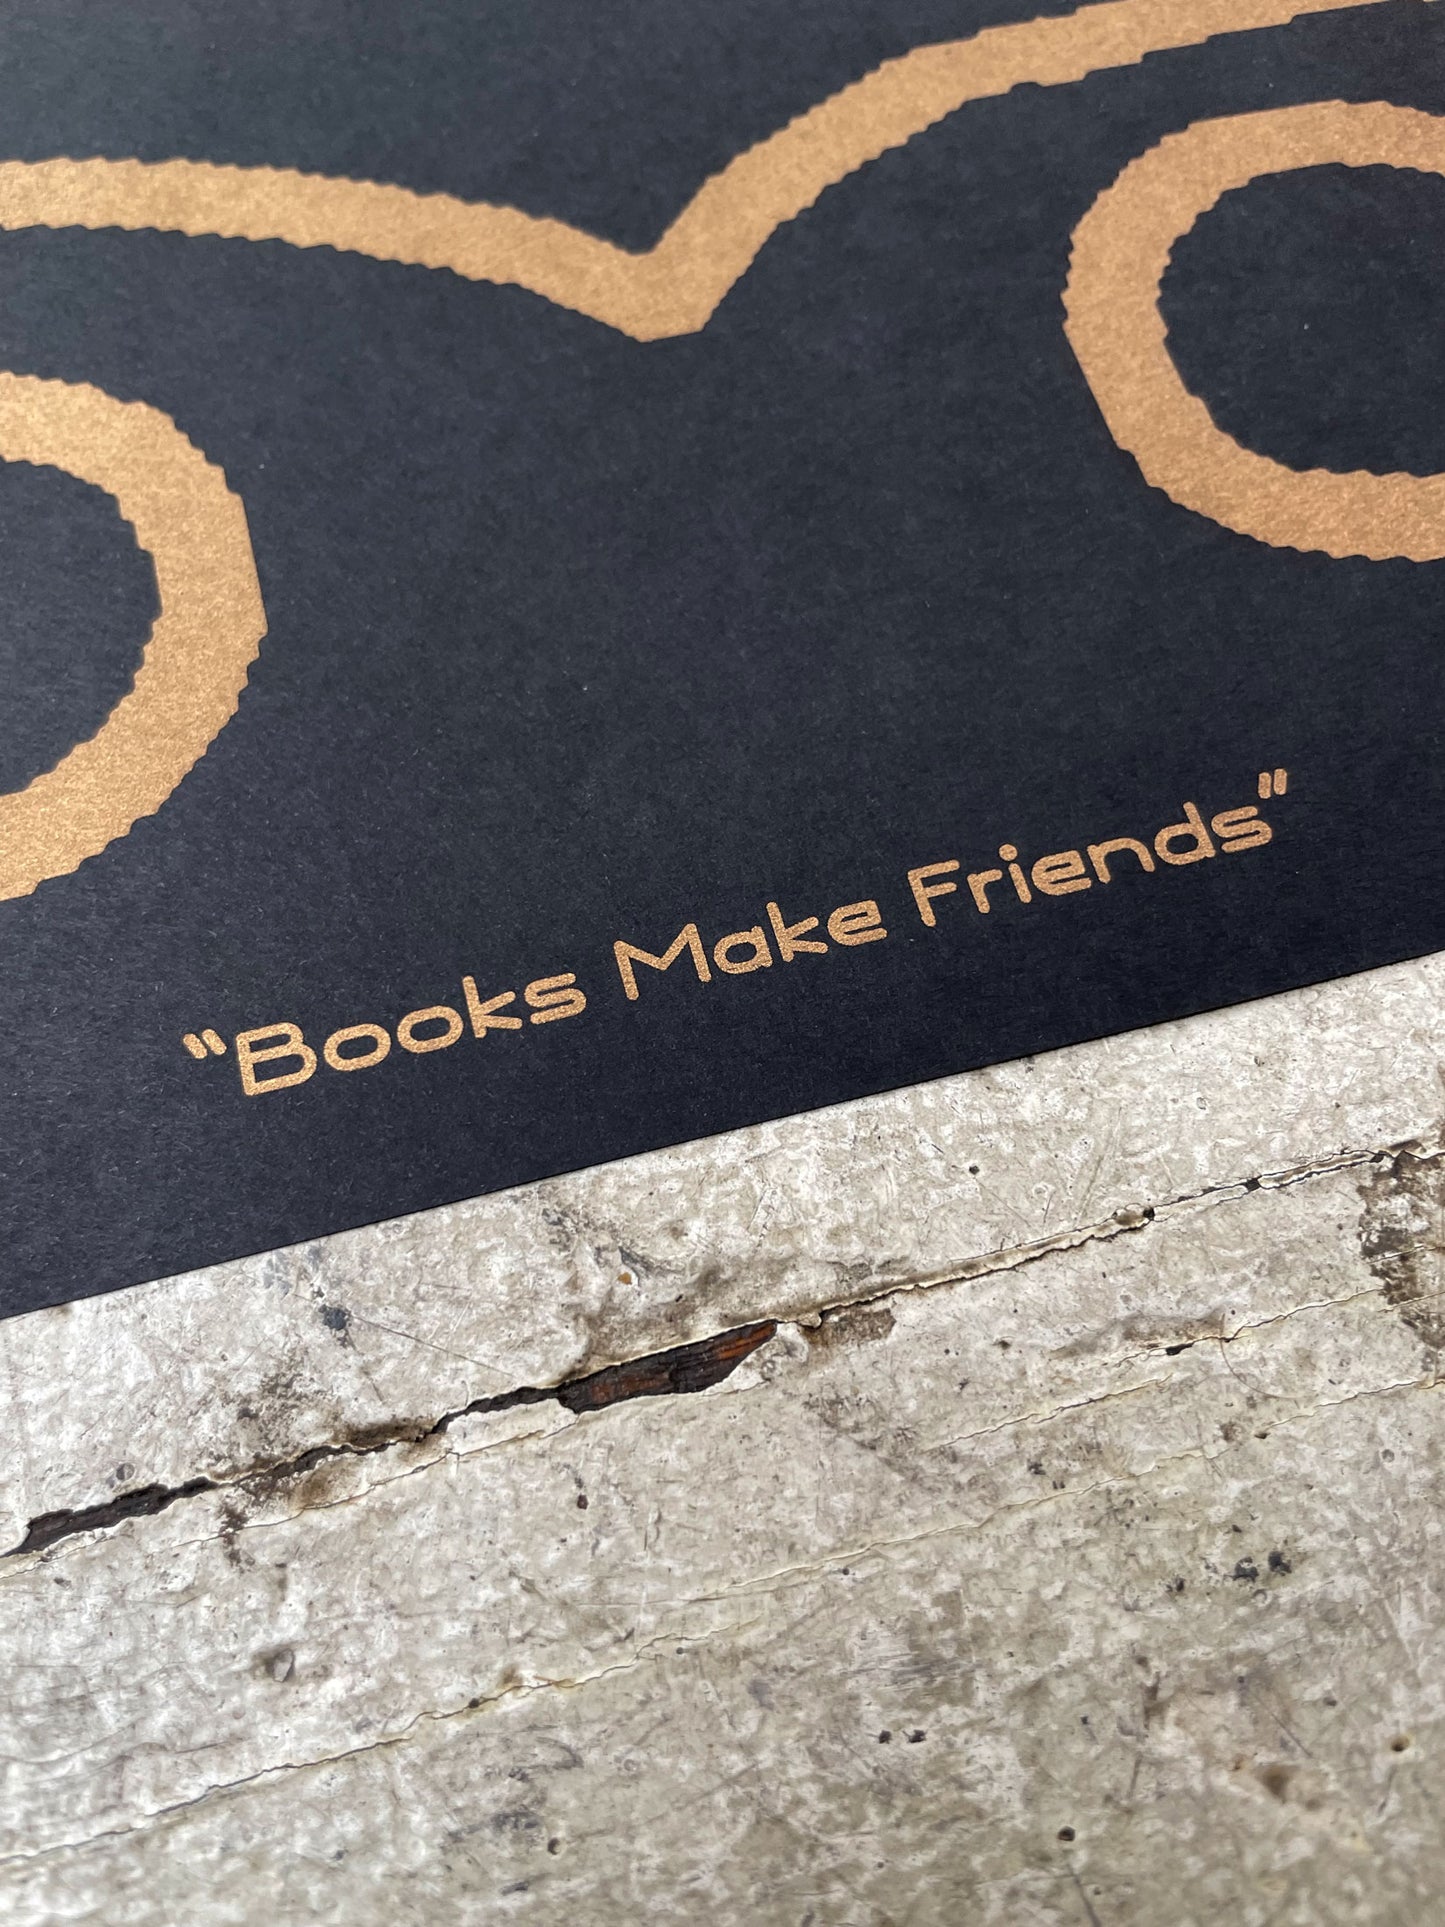 Books Make Friends by Thomas Colligan